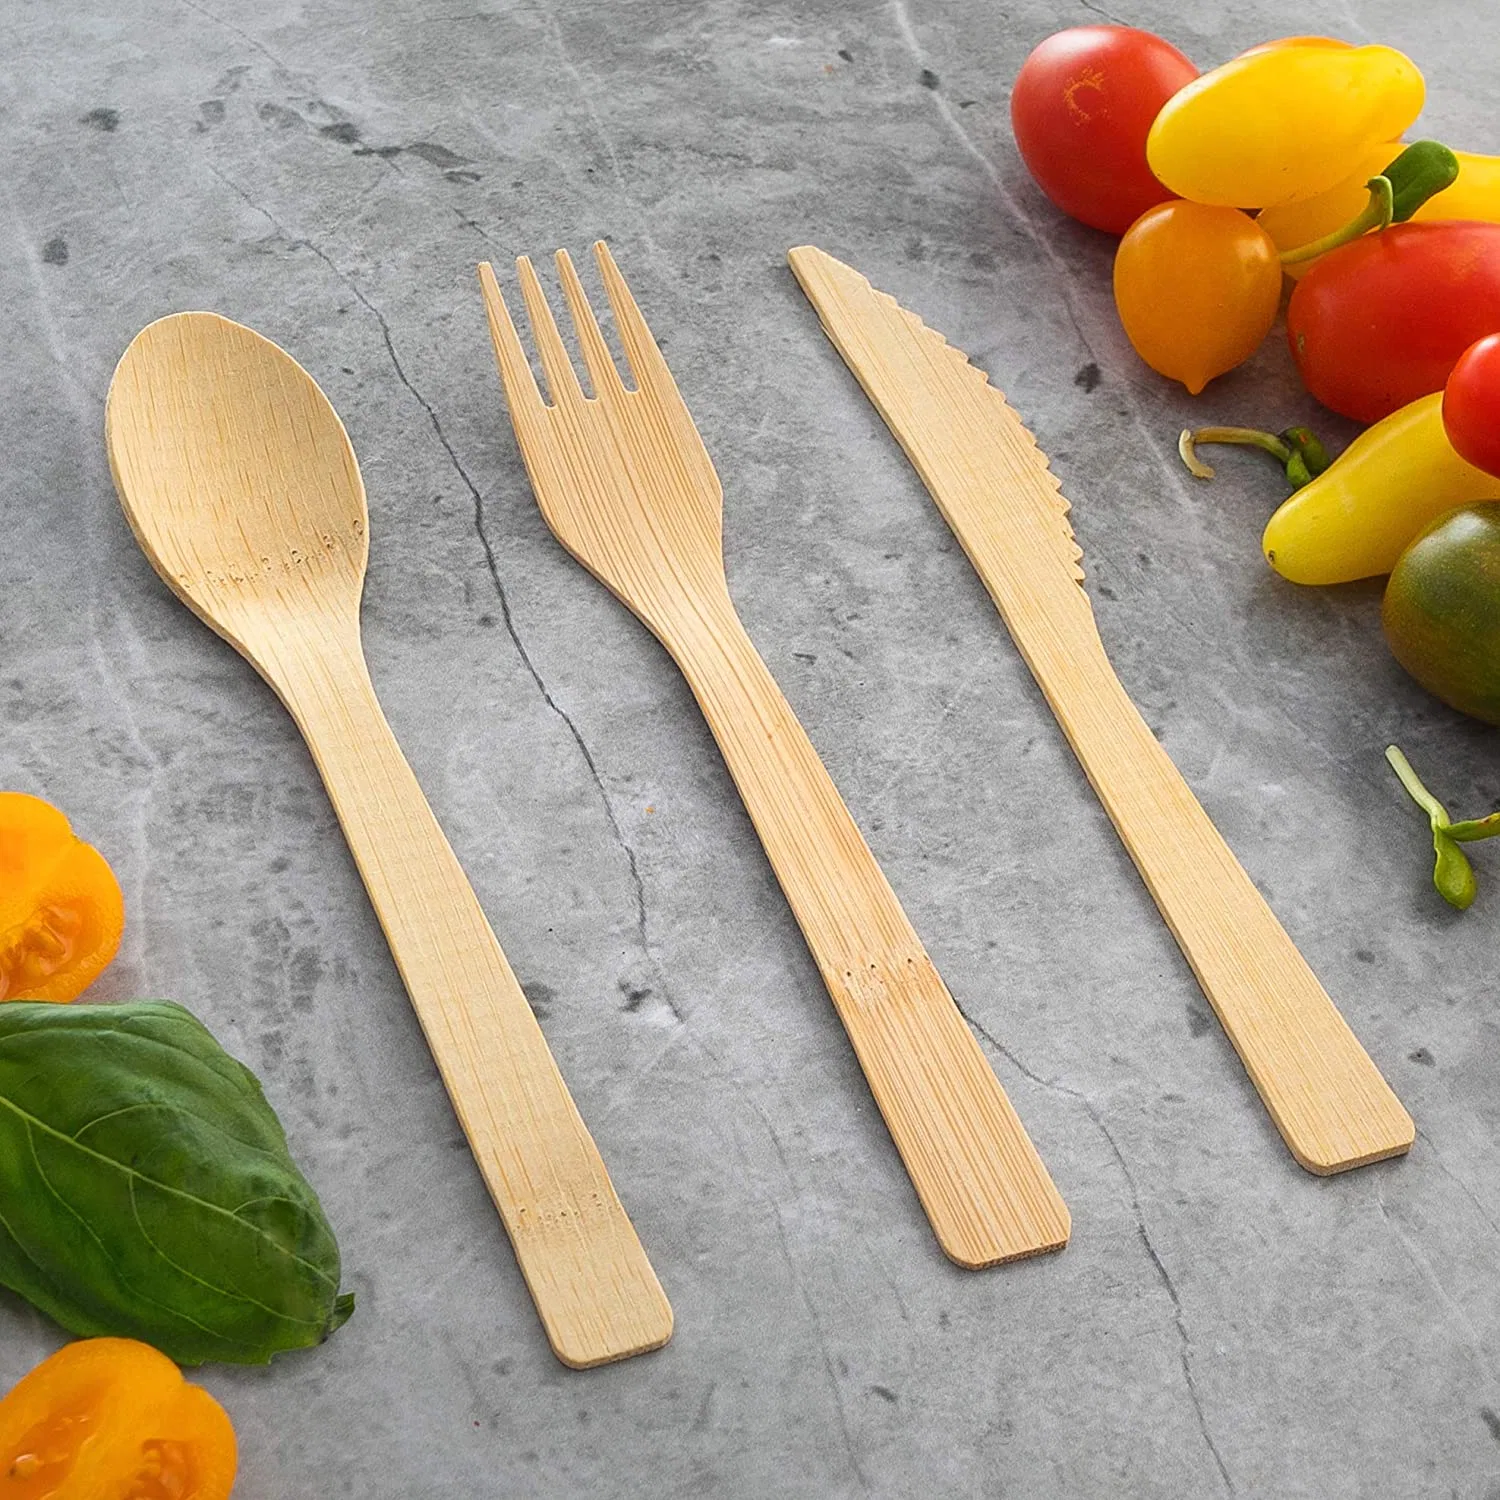 Disposable Eco-Friendly Bamboo Spoon Knife Fork Compostable Biodegradable Wooden Kitchenware